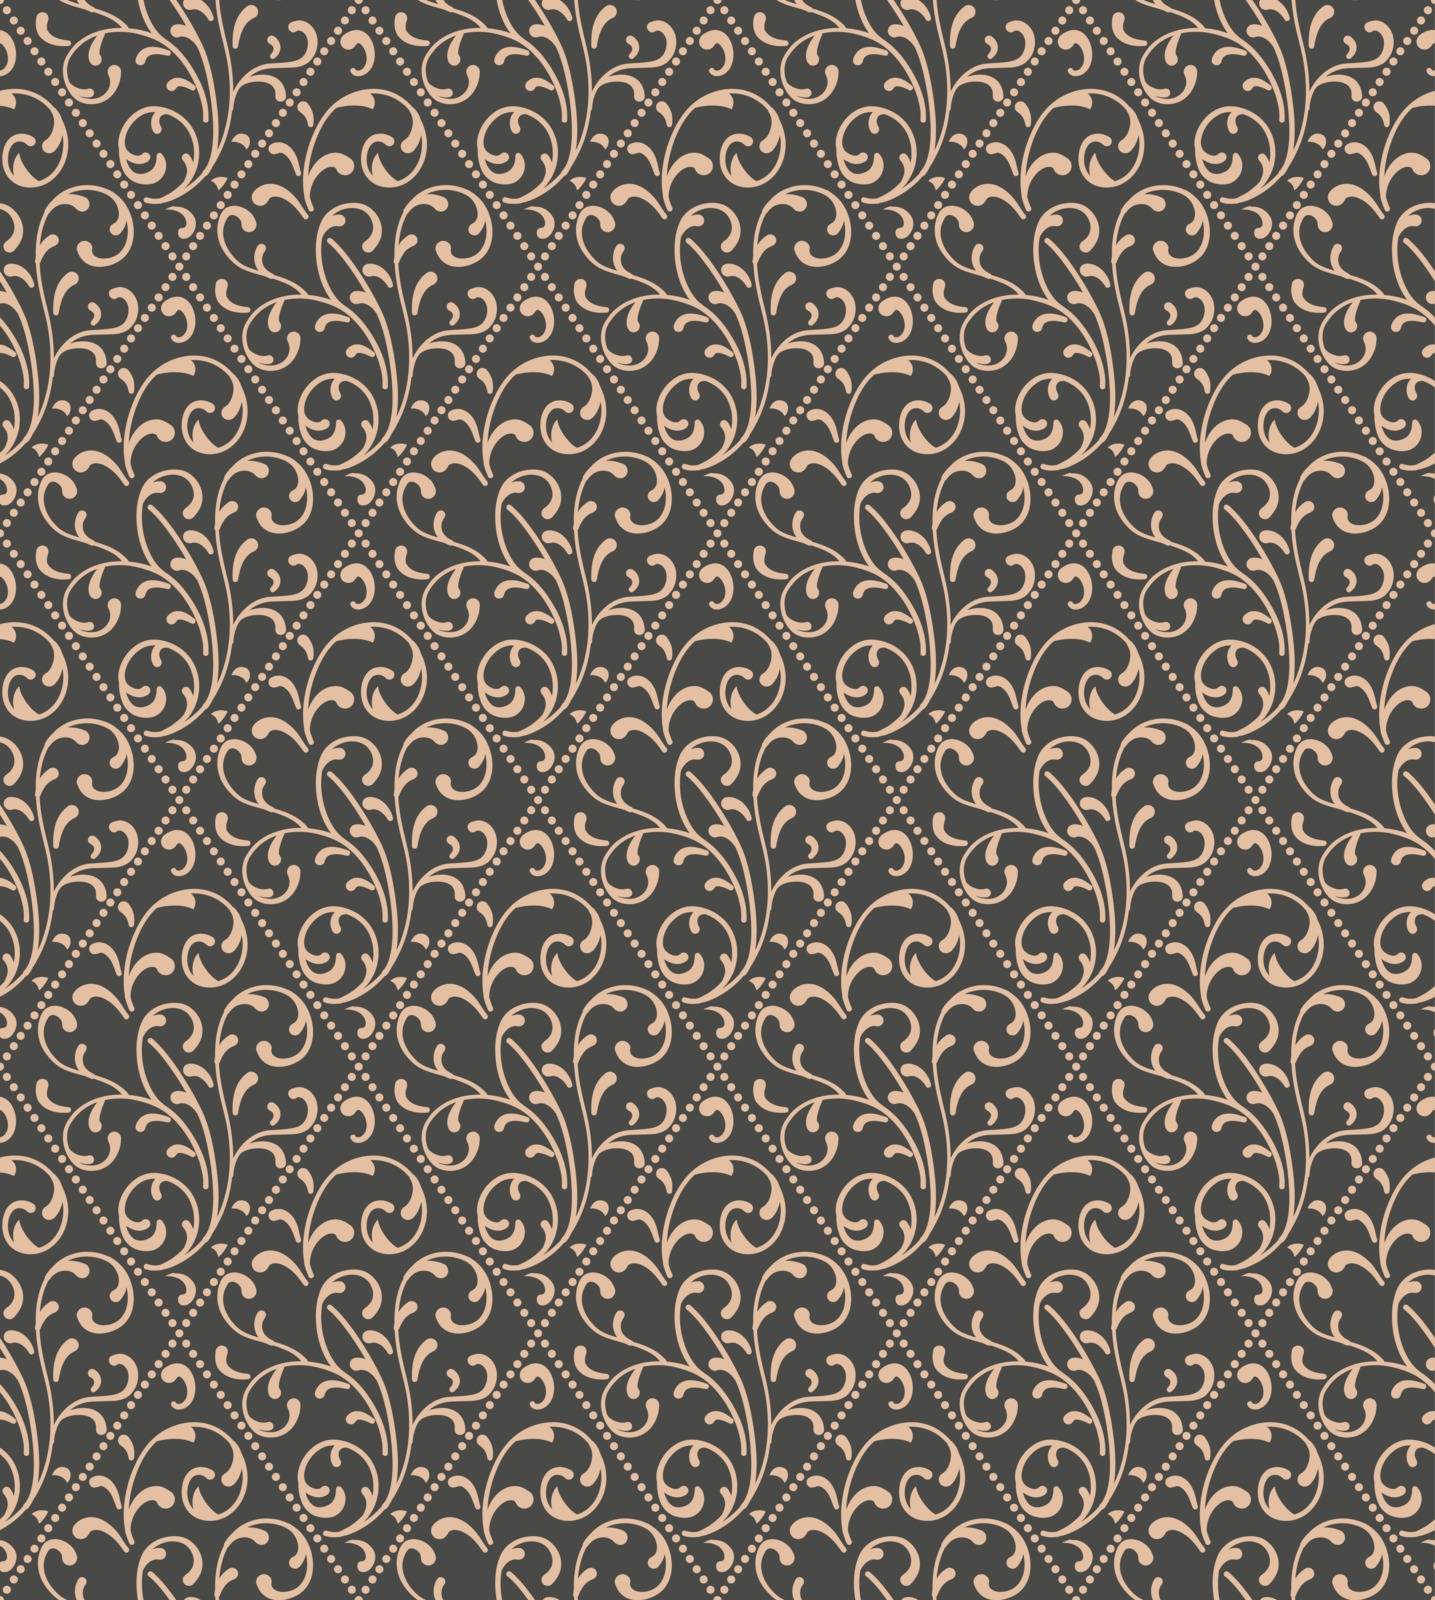 Floral seamless background by vtorous